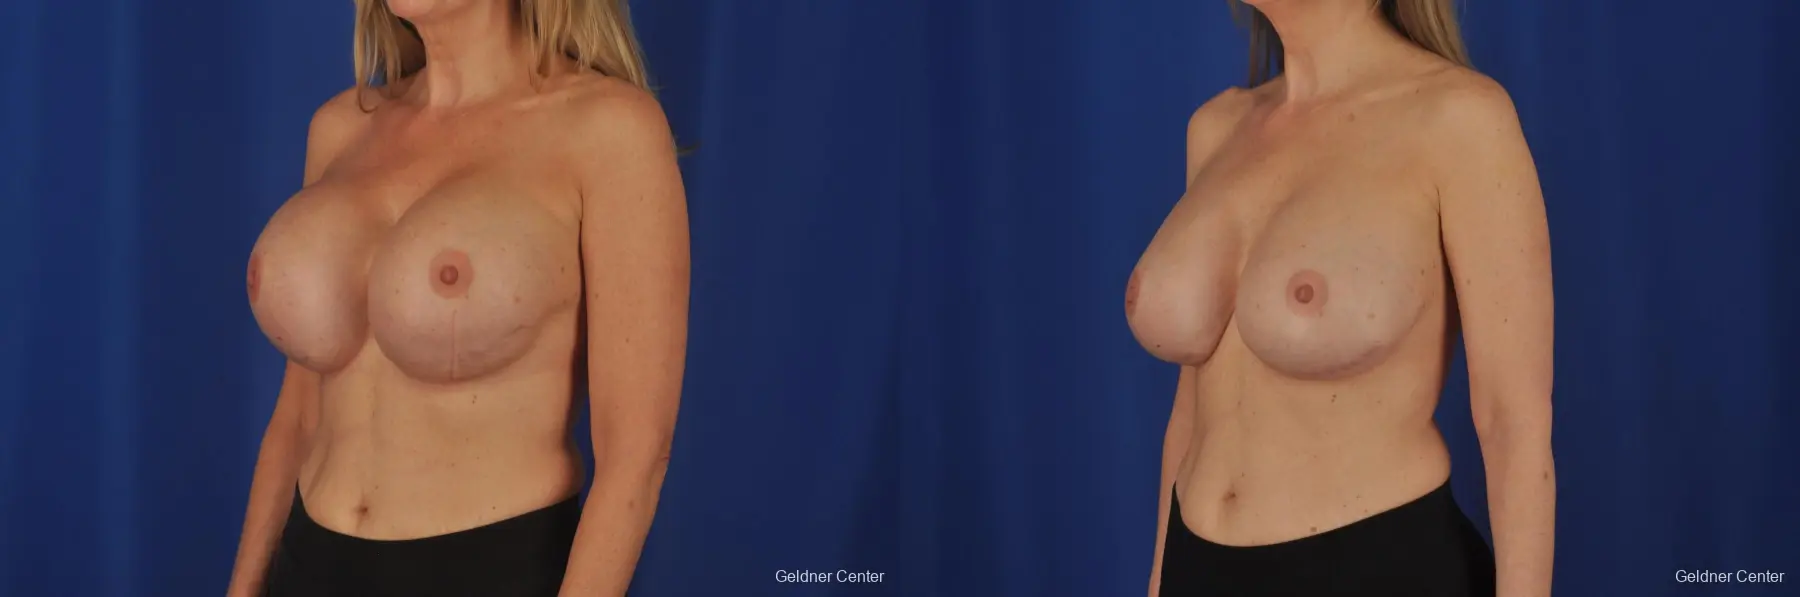 Complex Breast Augmentation Lake Shore Dr, Chicago 2389 - Before and After 4